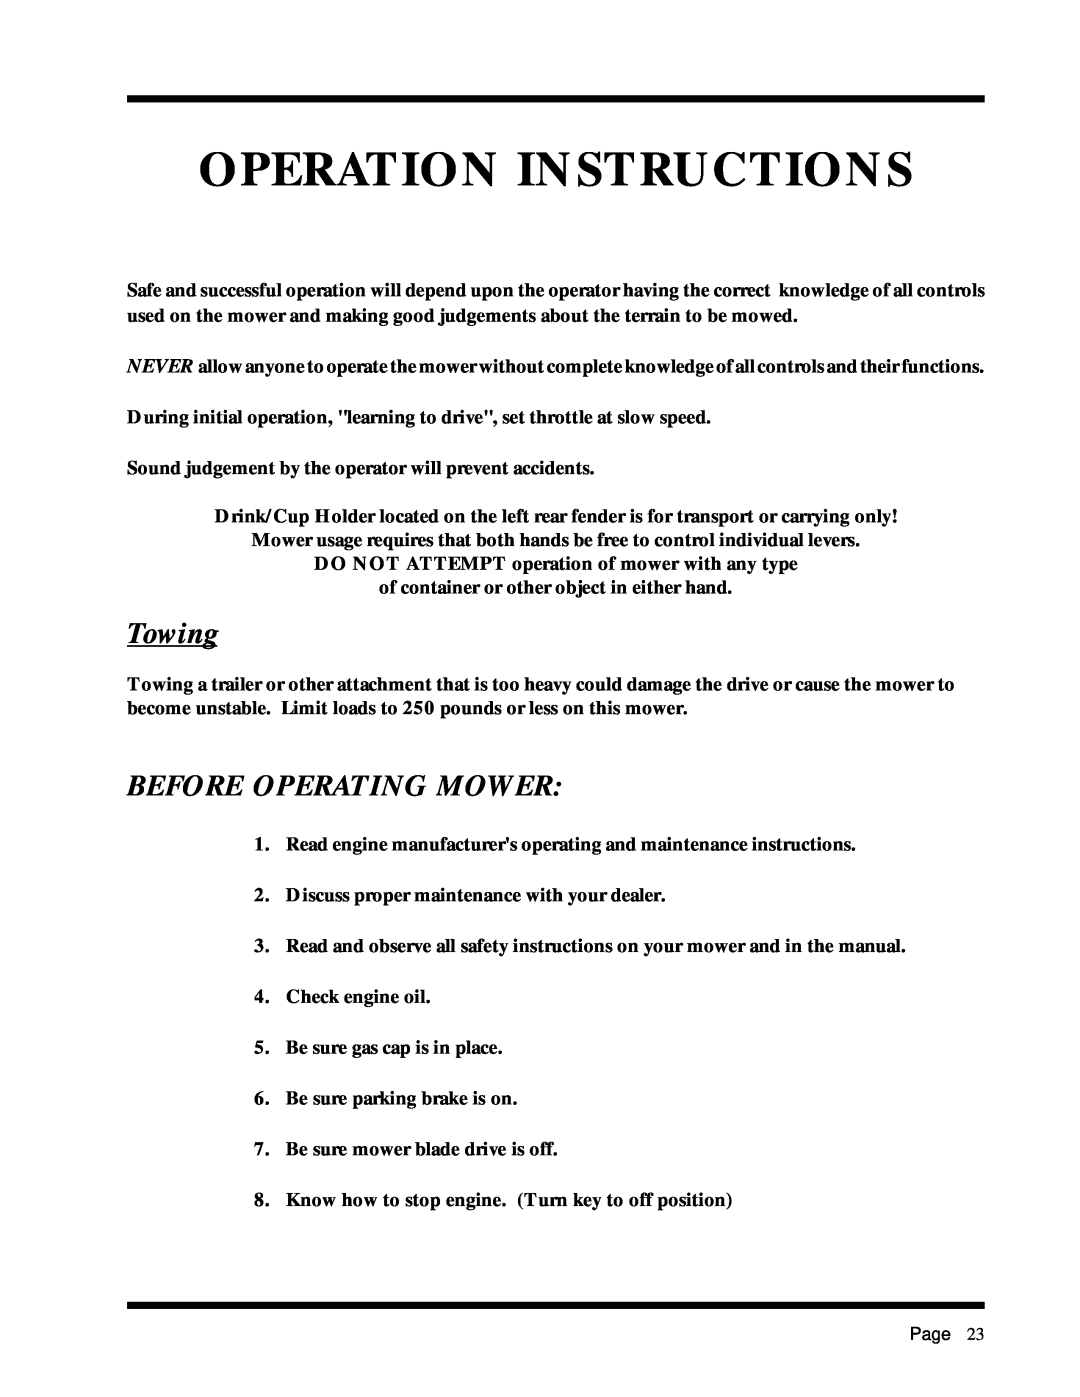 Dixon 6520-1099, ZTR 3303, ZTR 3304, 1855-0599 manual Operation Instructions, Towing, Before Operating Mower 